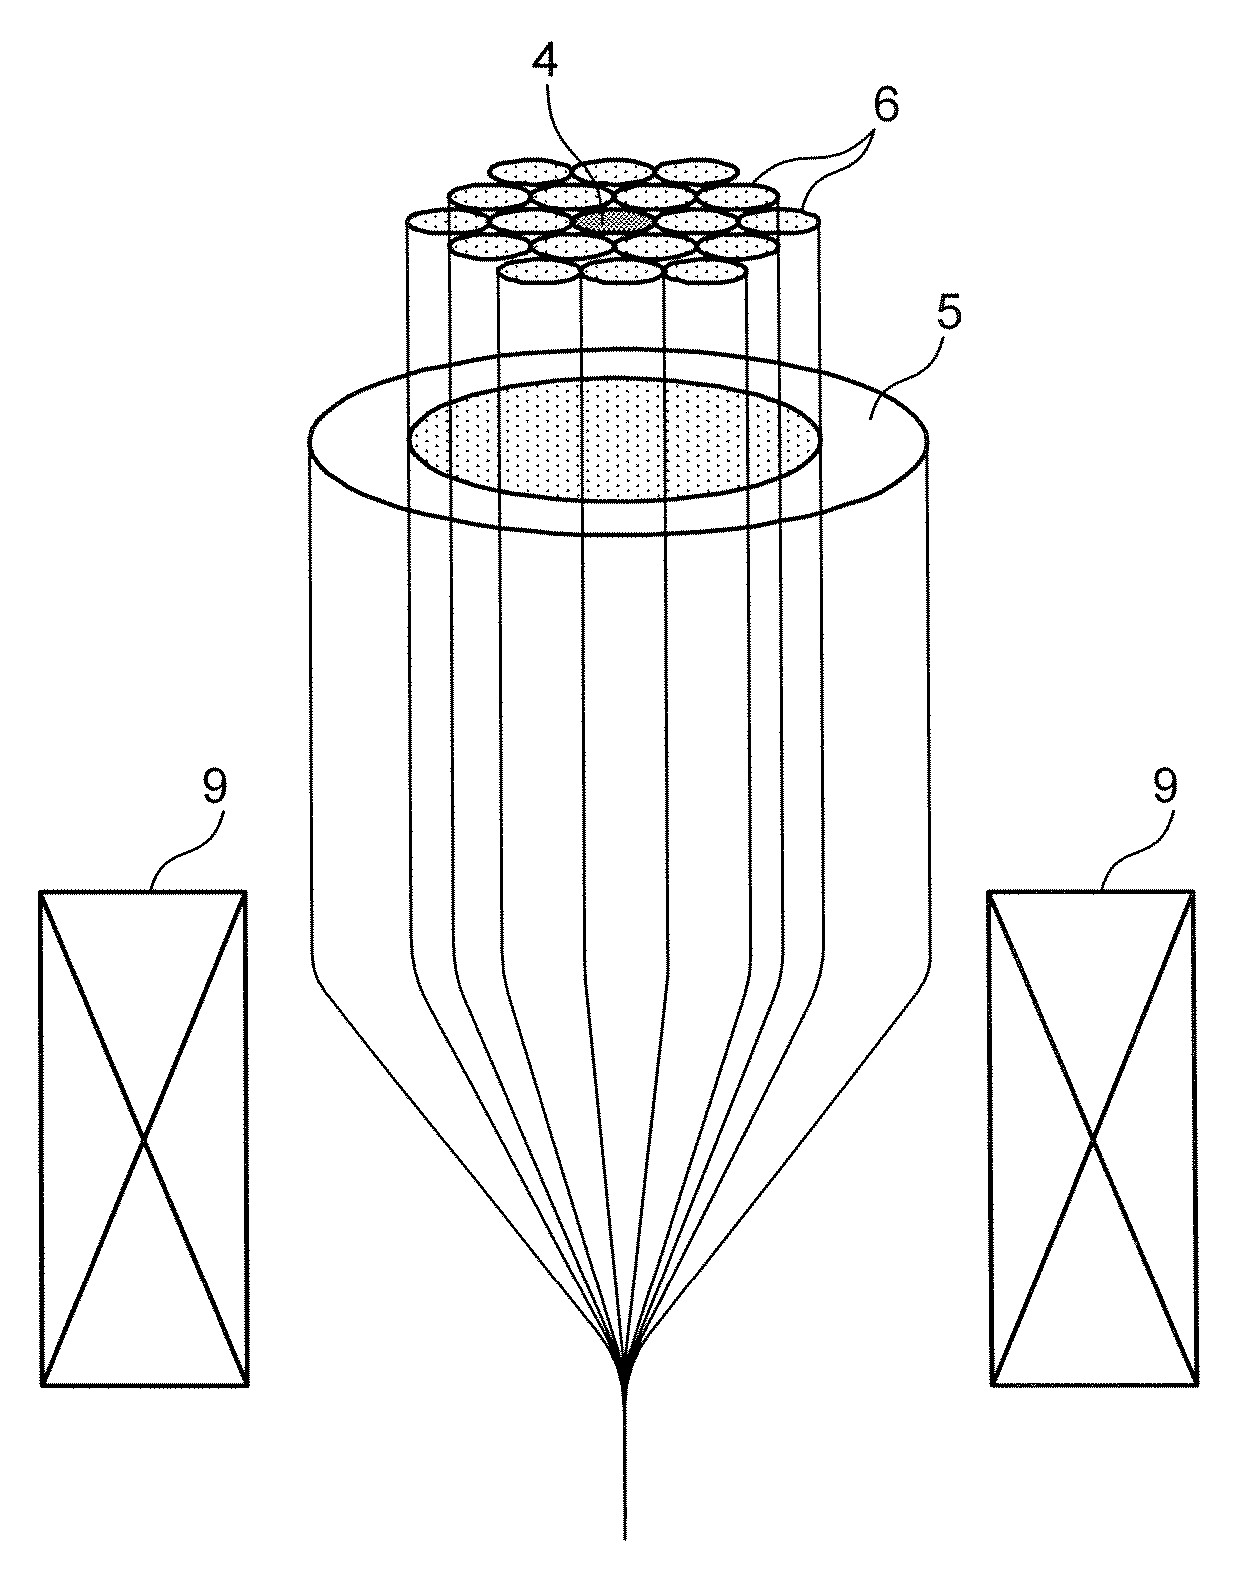 Method of manufacturing microstructured optical fiber